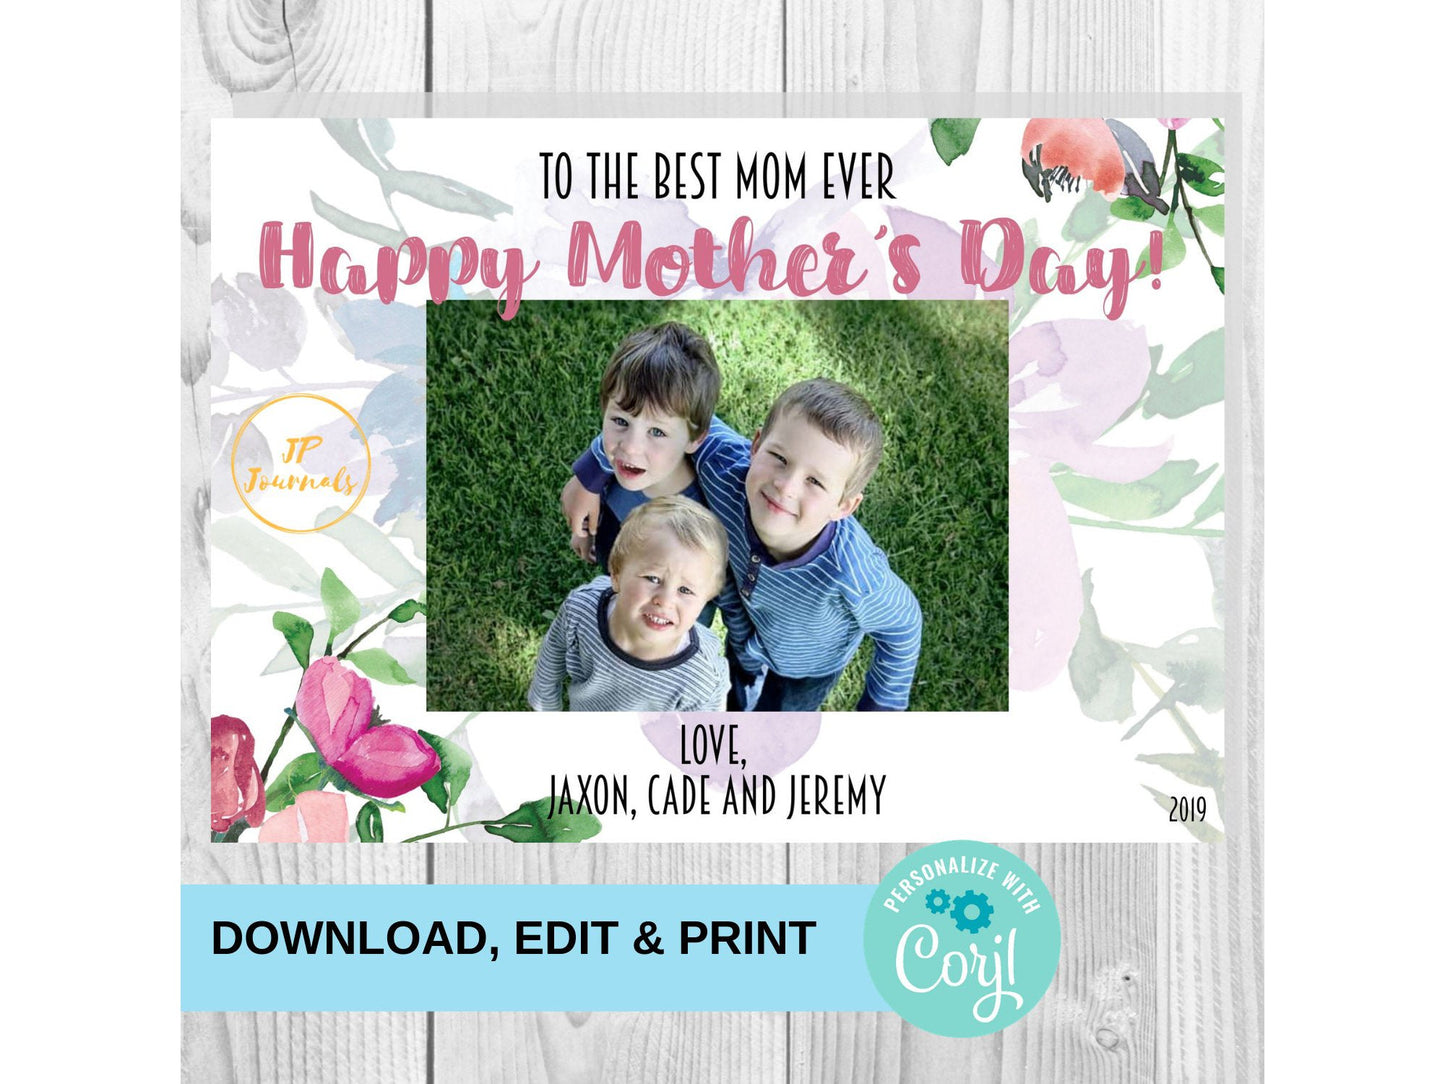 Printable Mother's Day Card - Add Your Own Photo and Text - Pretty Personalized Mother's Day Gift Card - To The Best Mom Ever From Kids